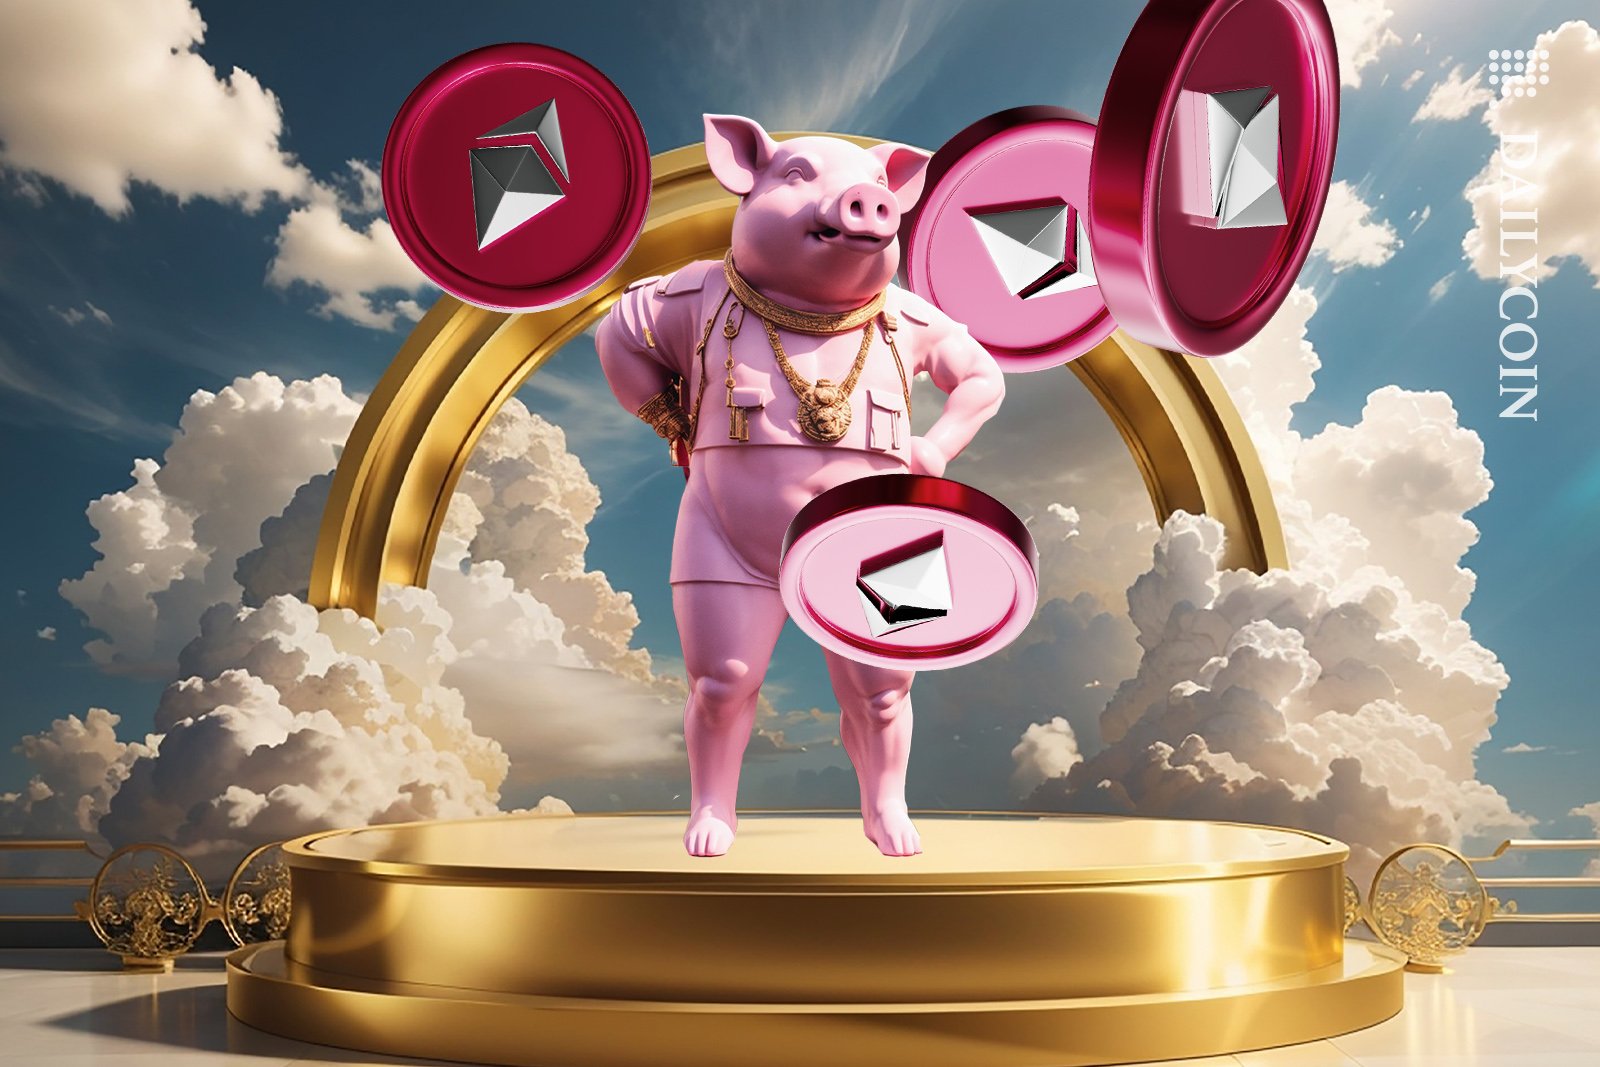 A pimped up pig is attracting Ethereum tokens.